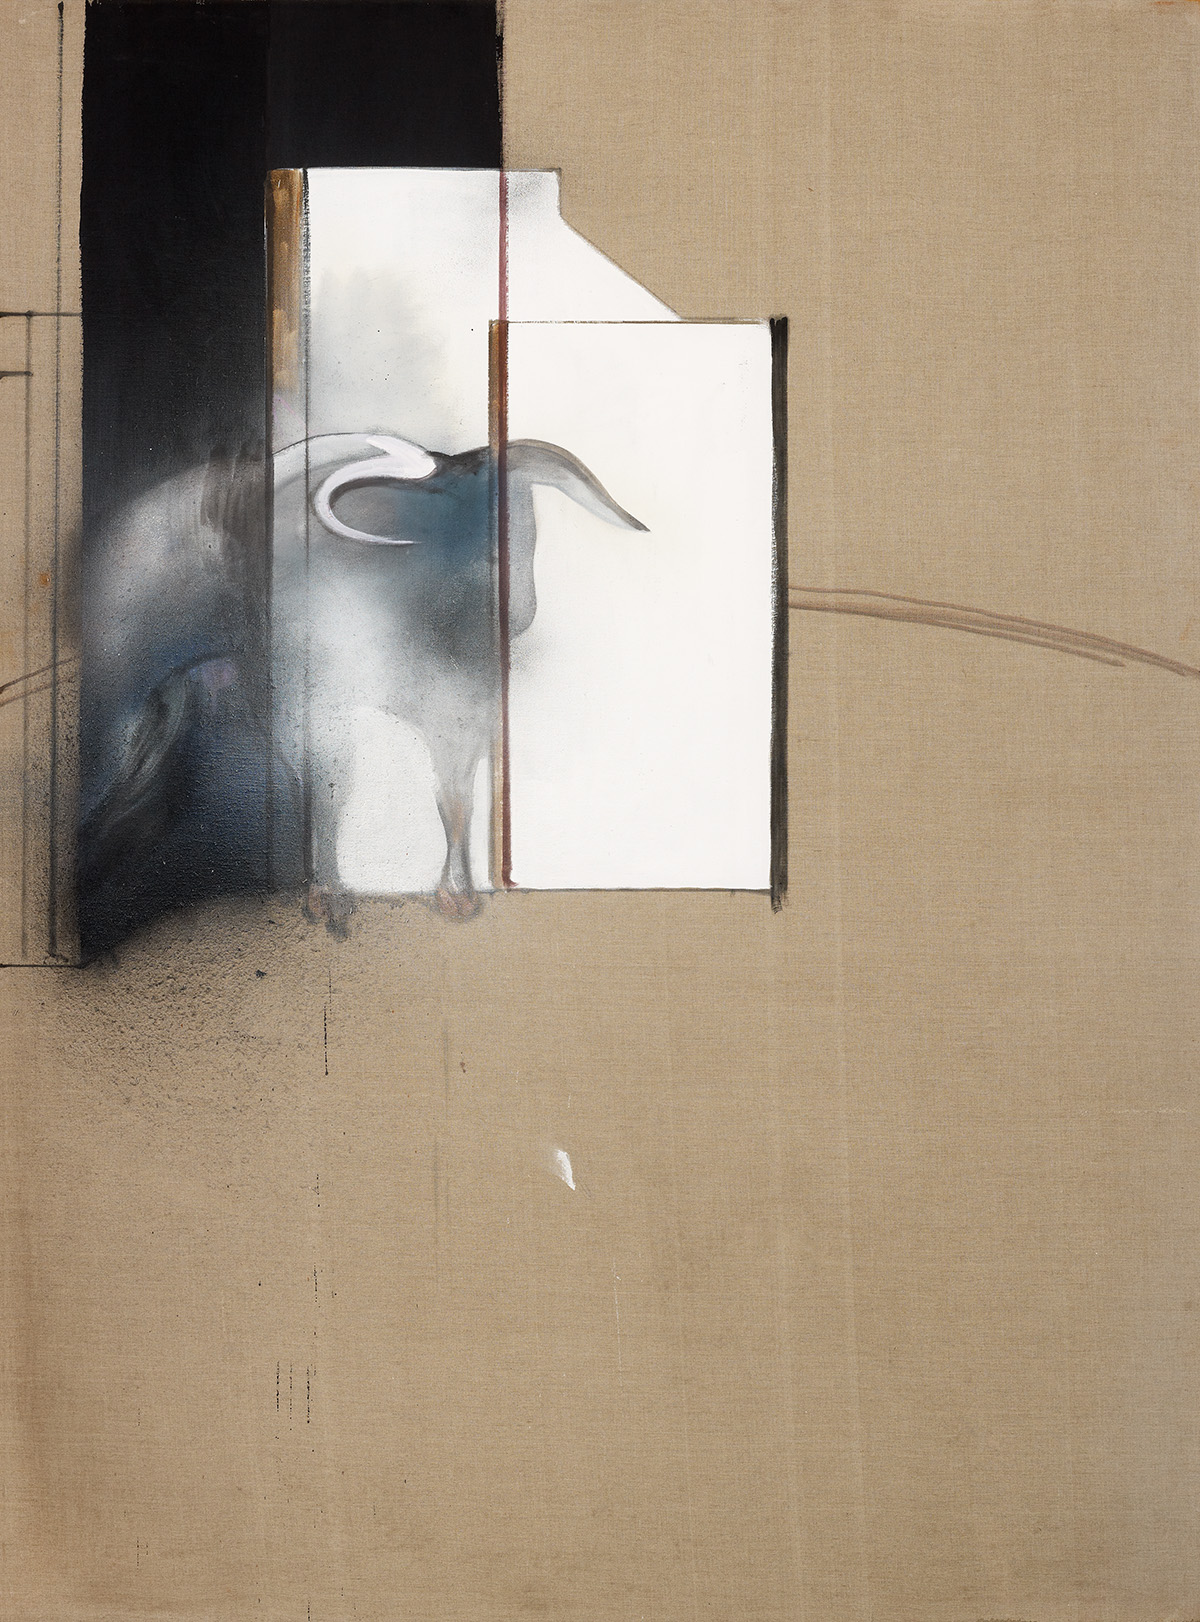 Francis Bacon, Study of a Bull, 1991. Oil, aerosol paint and dust on canvas. CR number 91-04. © The Estate of Francis Bacon / DACS London 2020. All rights reserved.